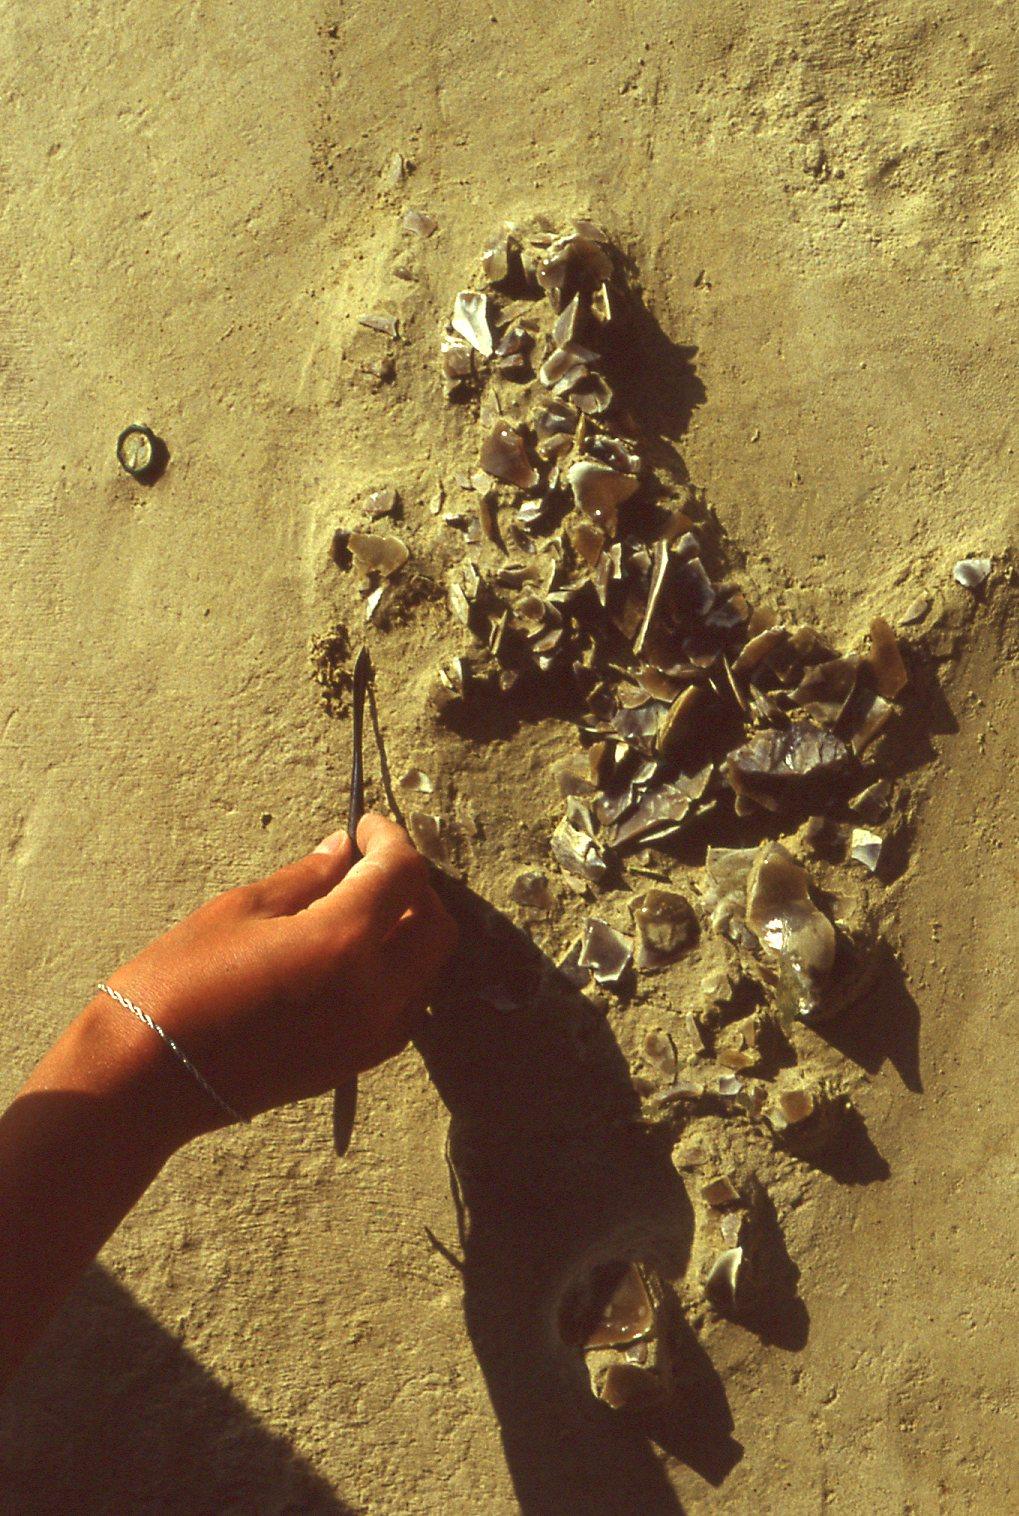 A small knapping scatter relating to the reshaping of a biface, preserving the imprint of an early human knee in the shards of waste flint, under excavation in 1989 (Copyright UCL Institute of Archaeology)